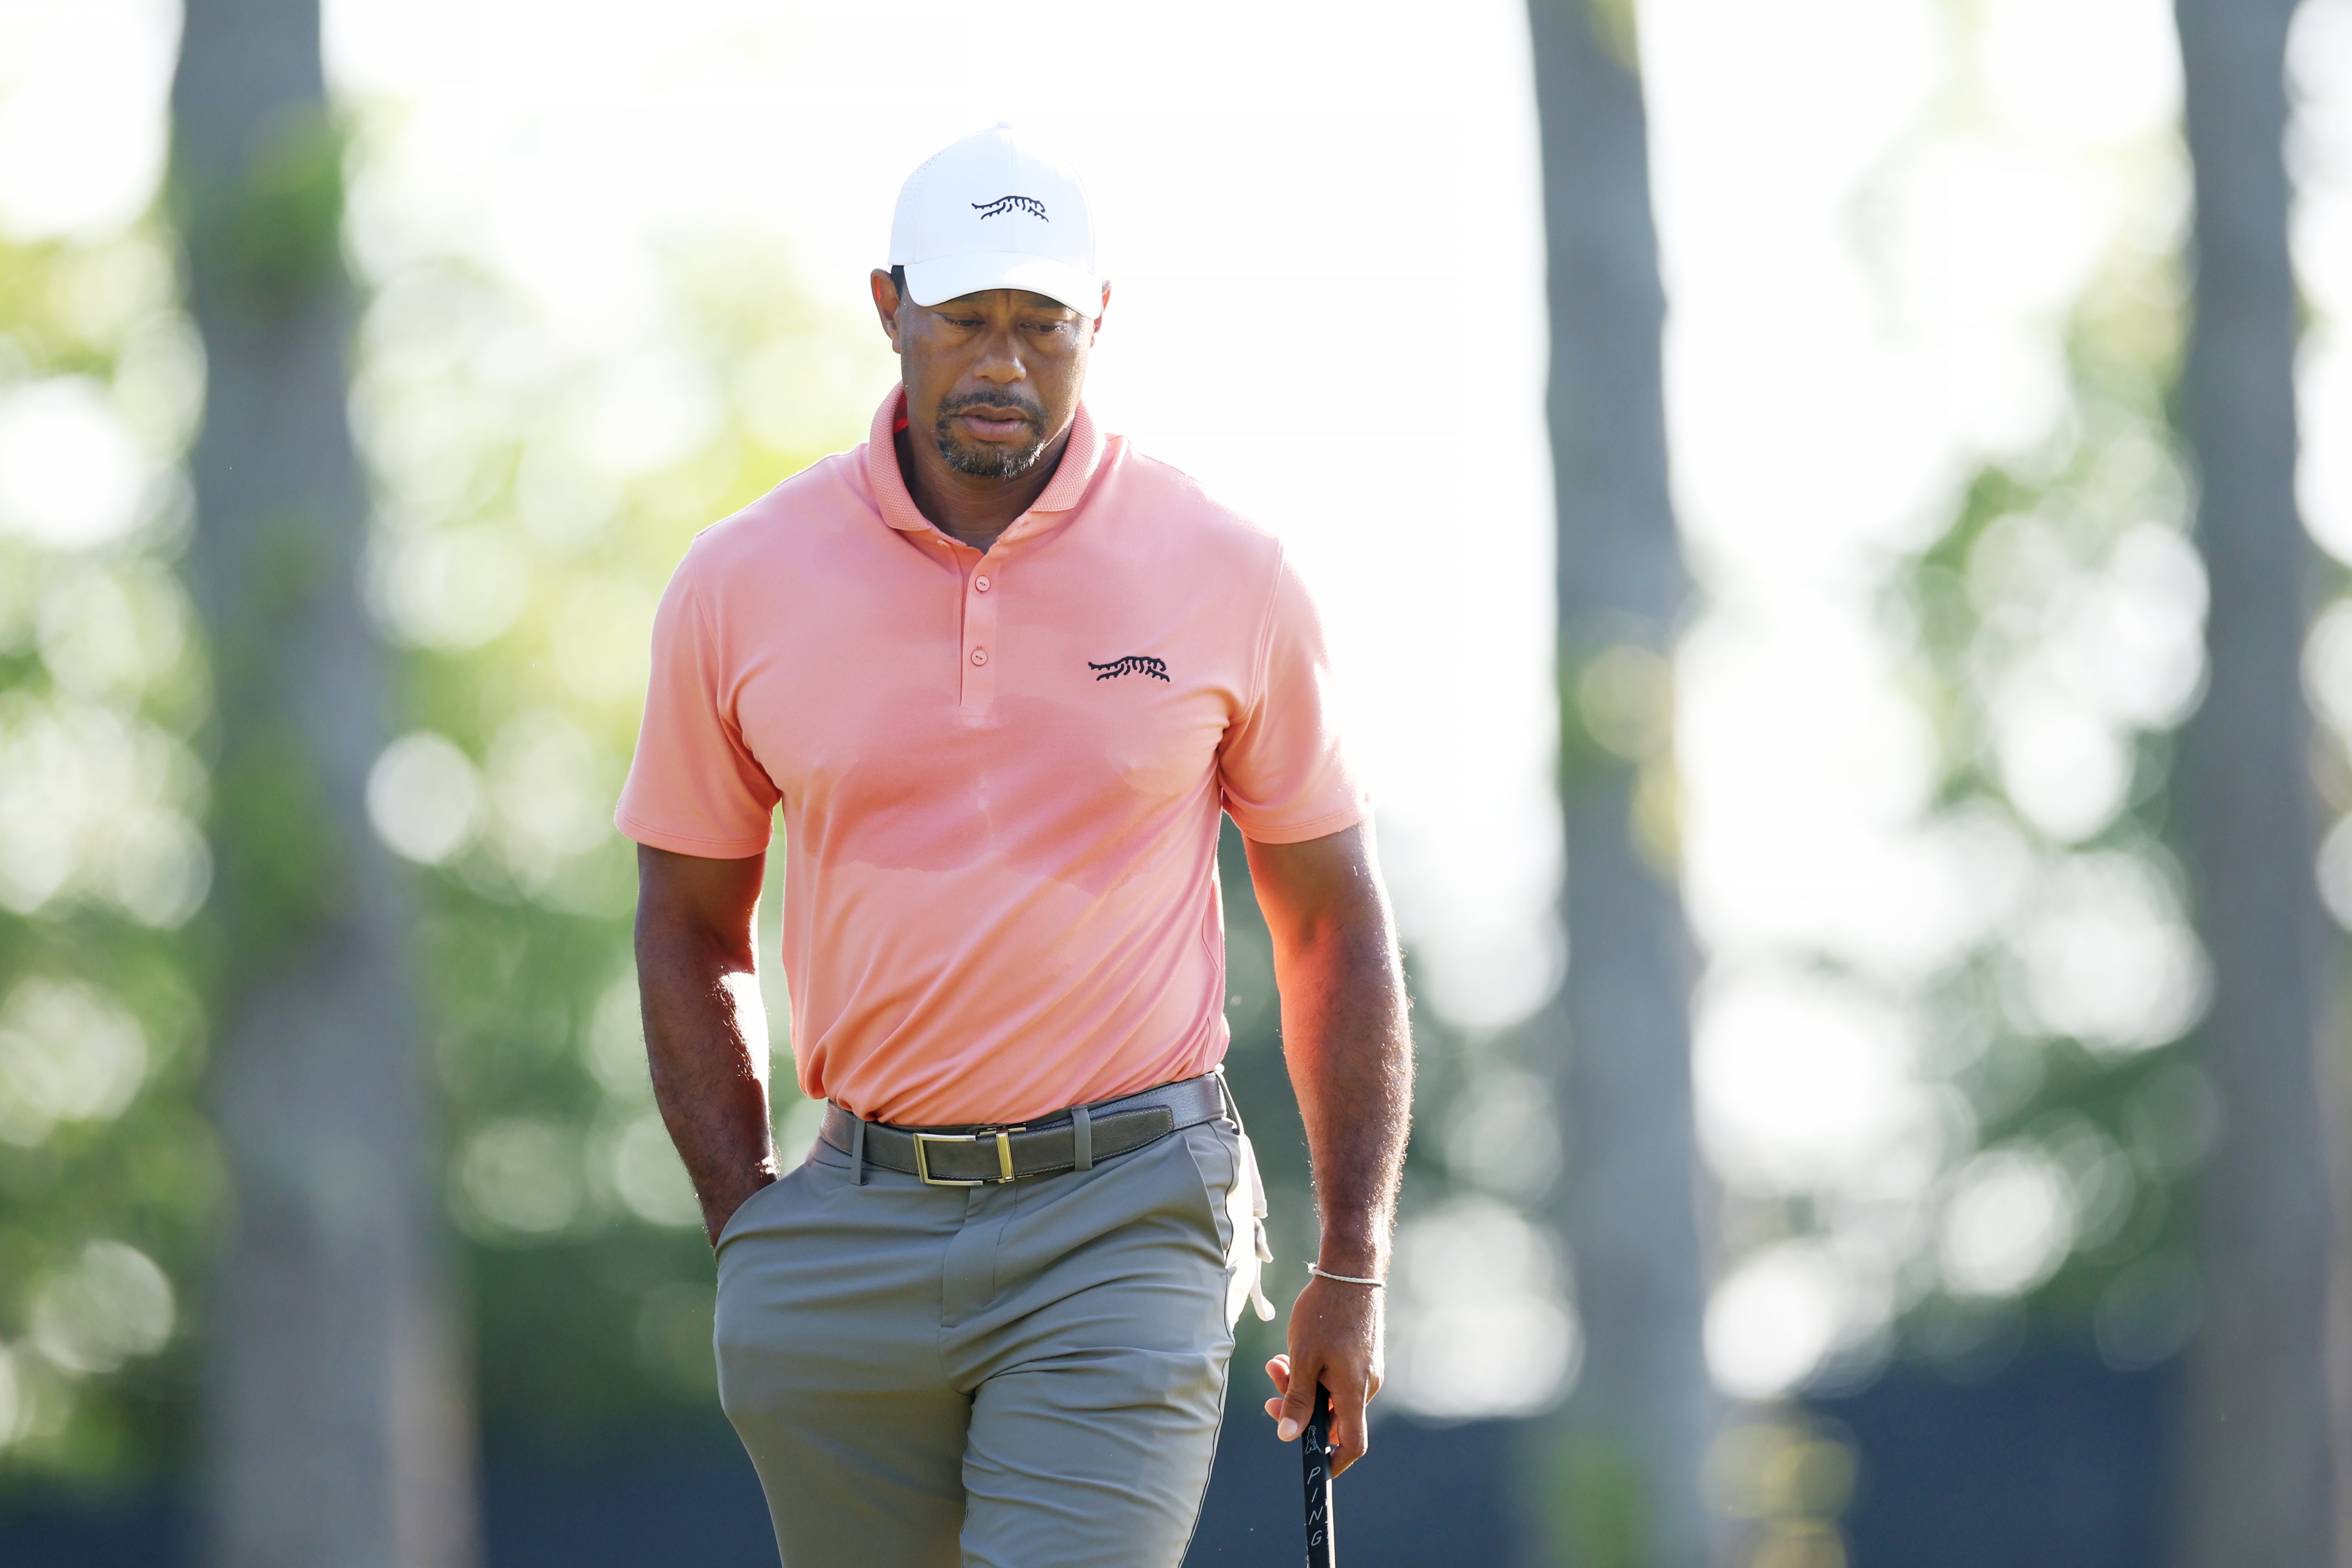 Tiger Woods shot a one-over round of 72 on the opening day at Valhalla